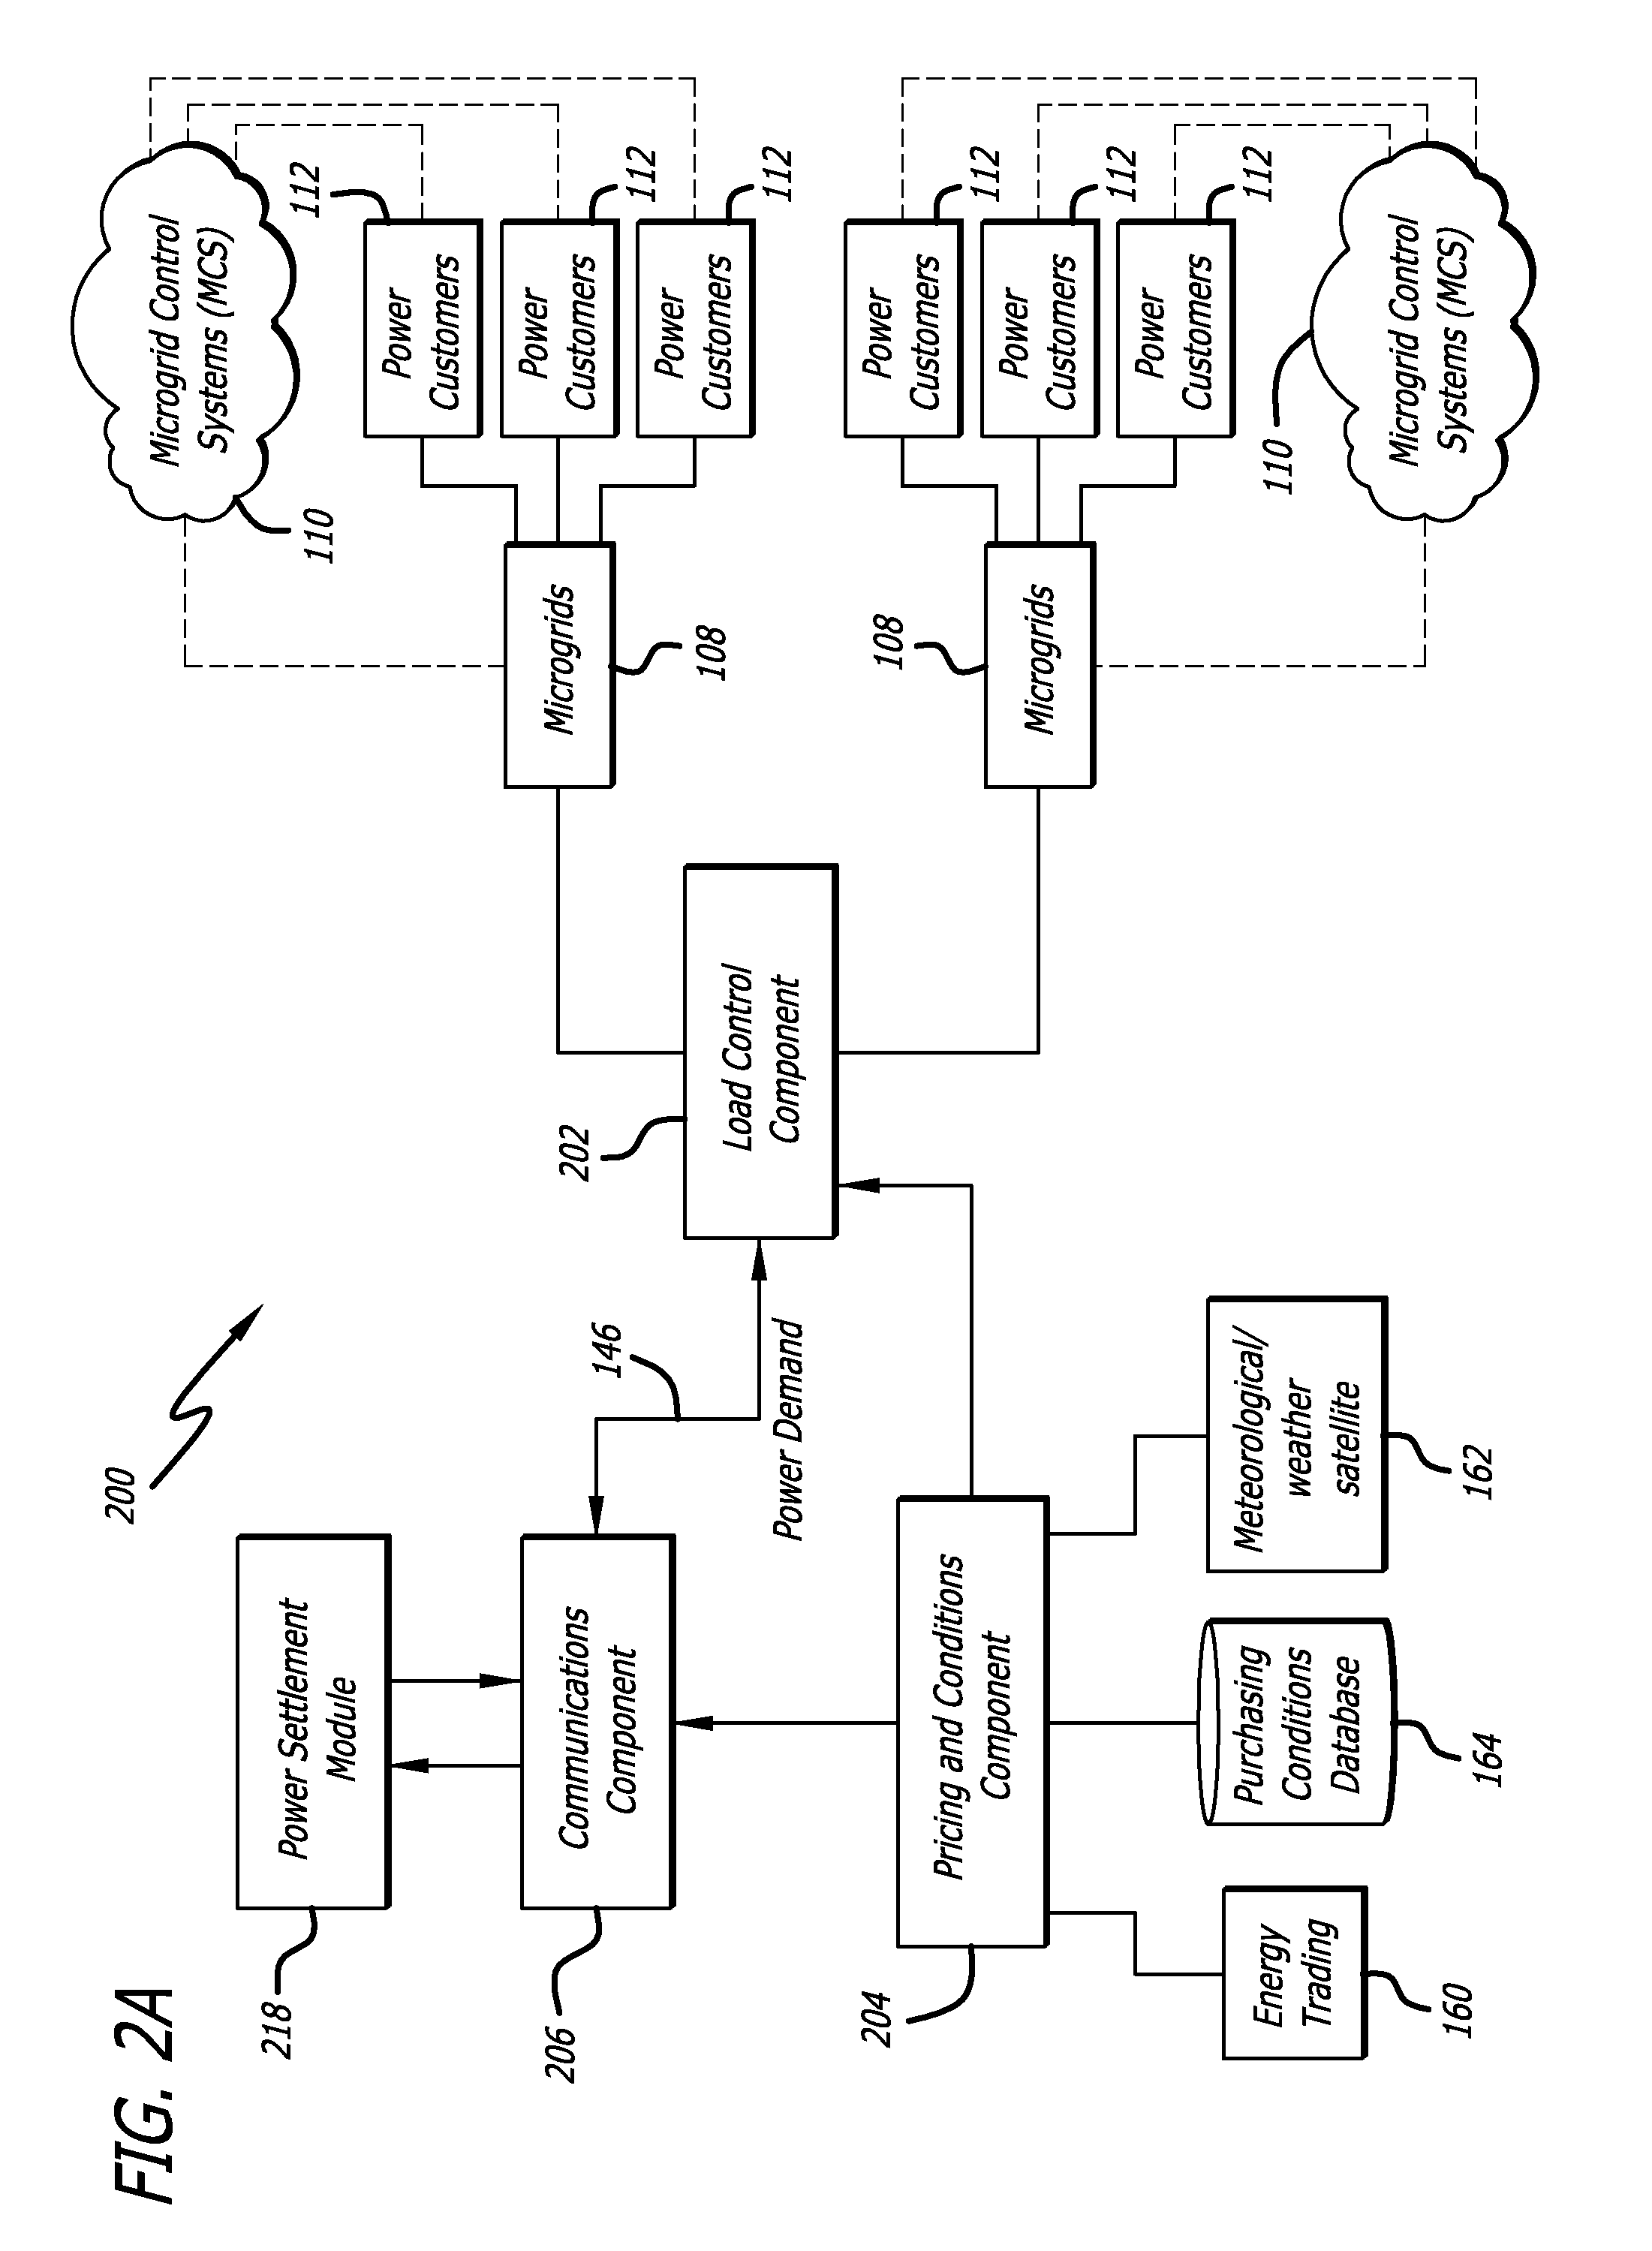 Energy management system for power transmission to an intelligent electricity grid from a multi-resource renewable energy installation